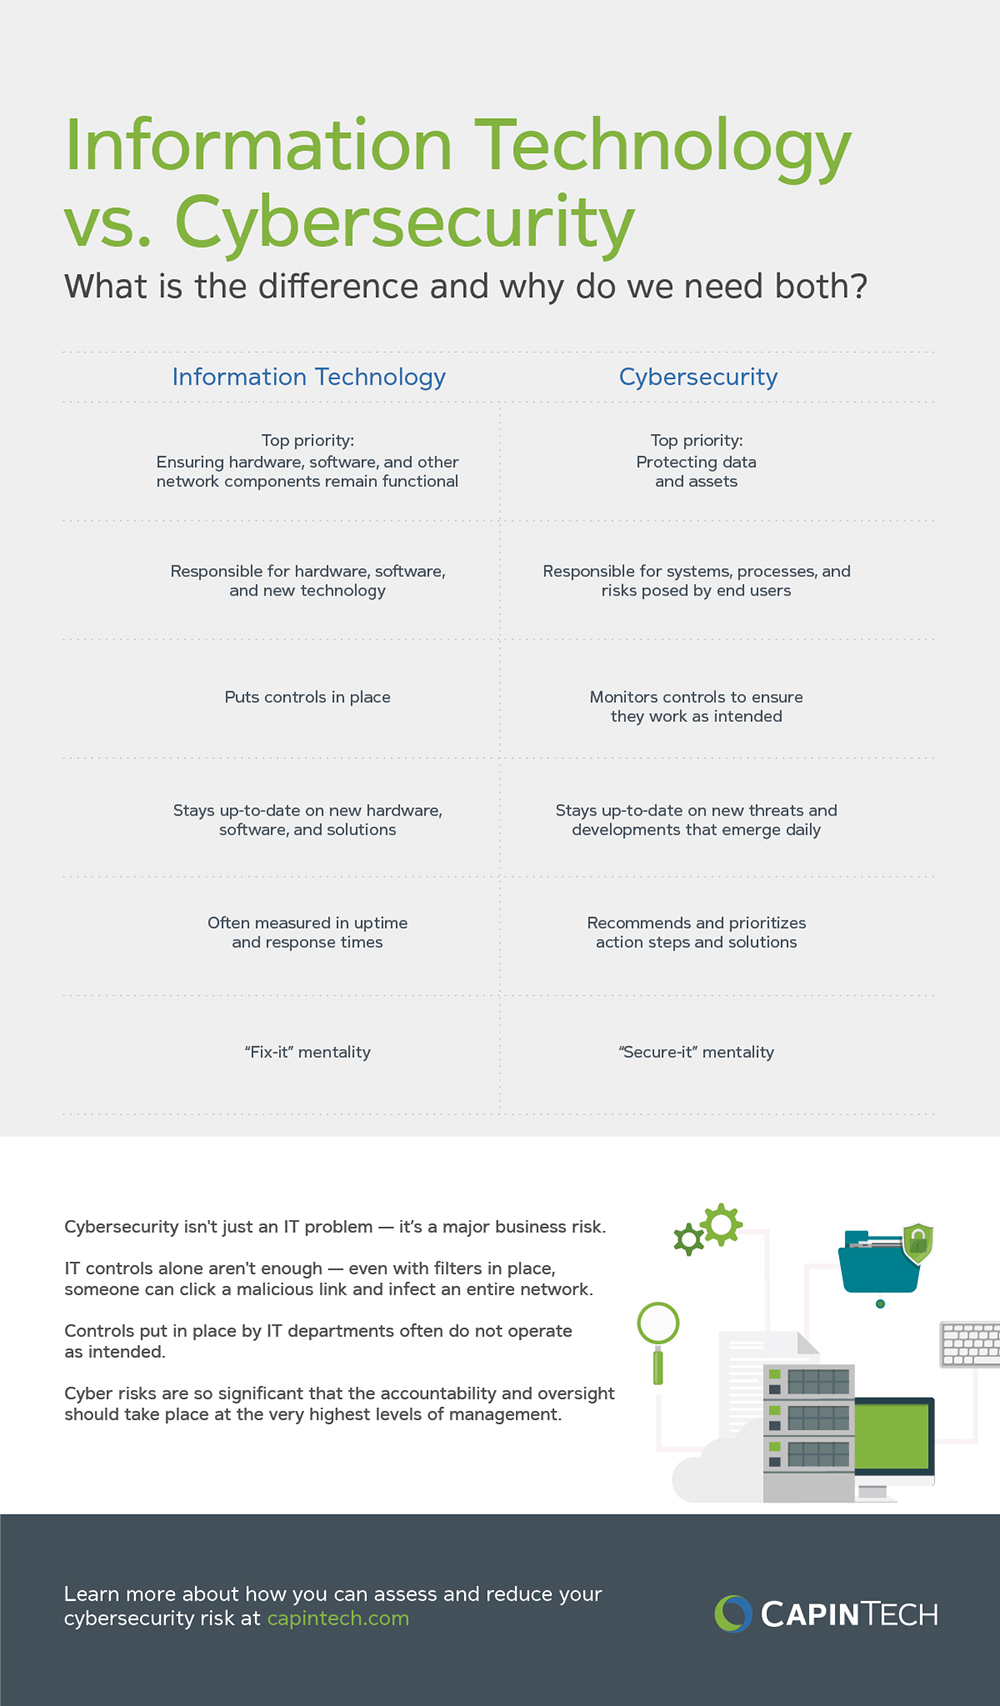 The difference between information technology and cybersecurity